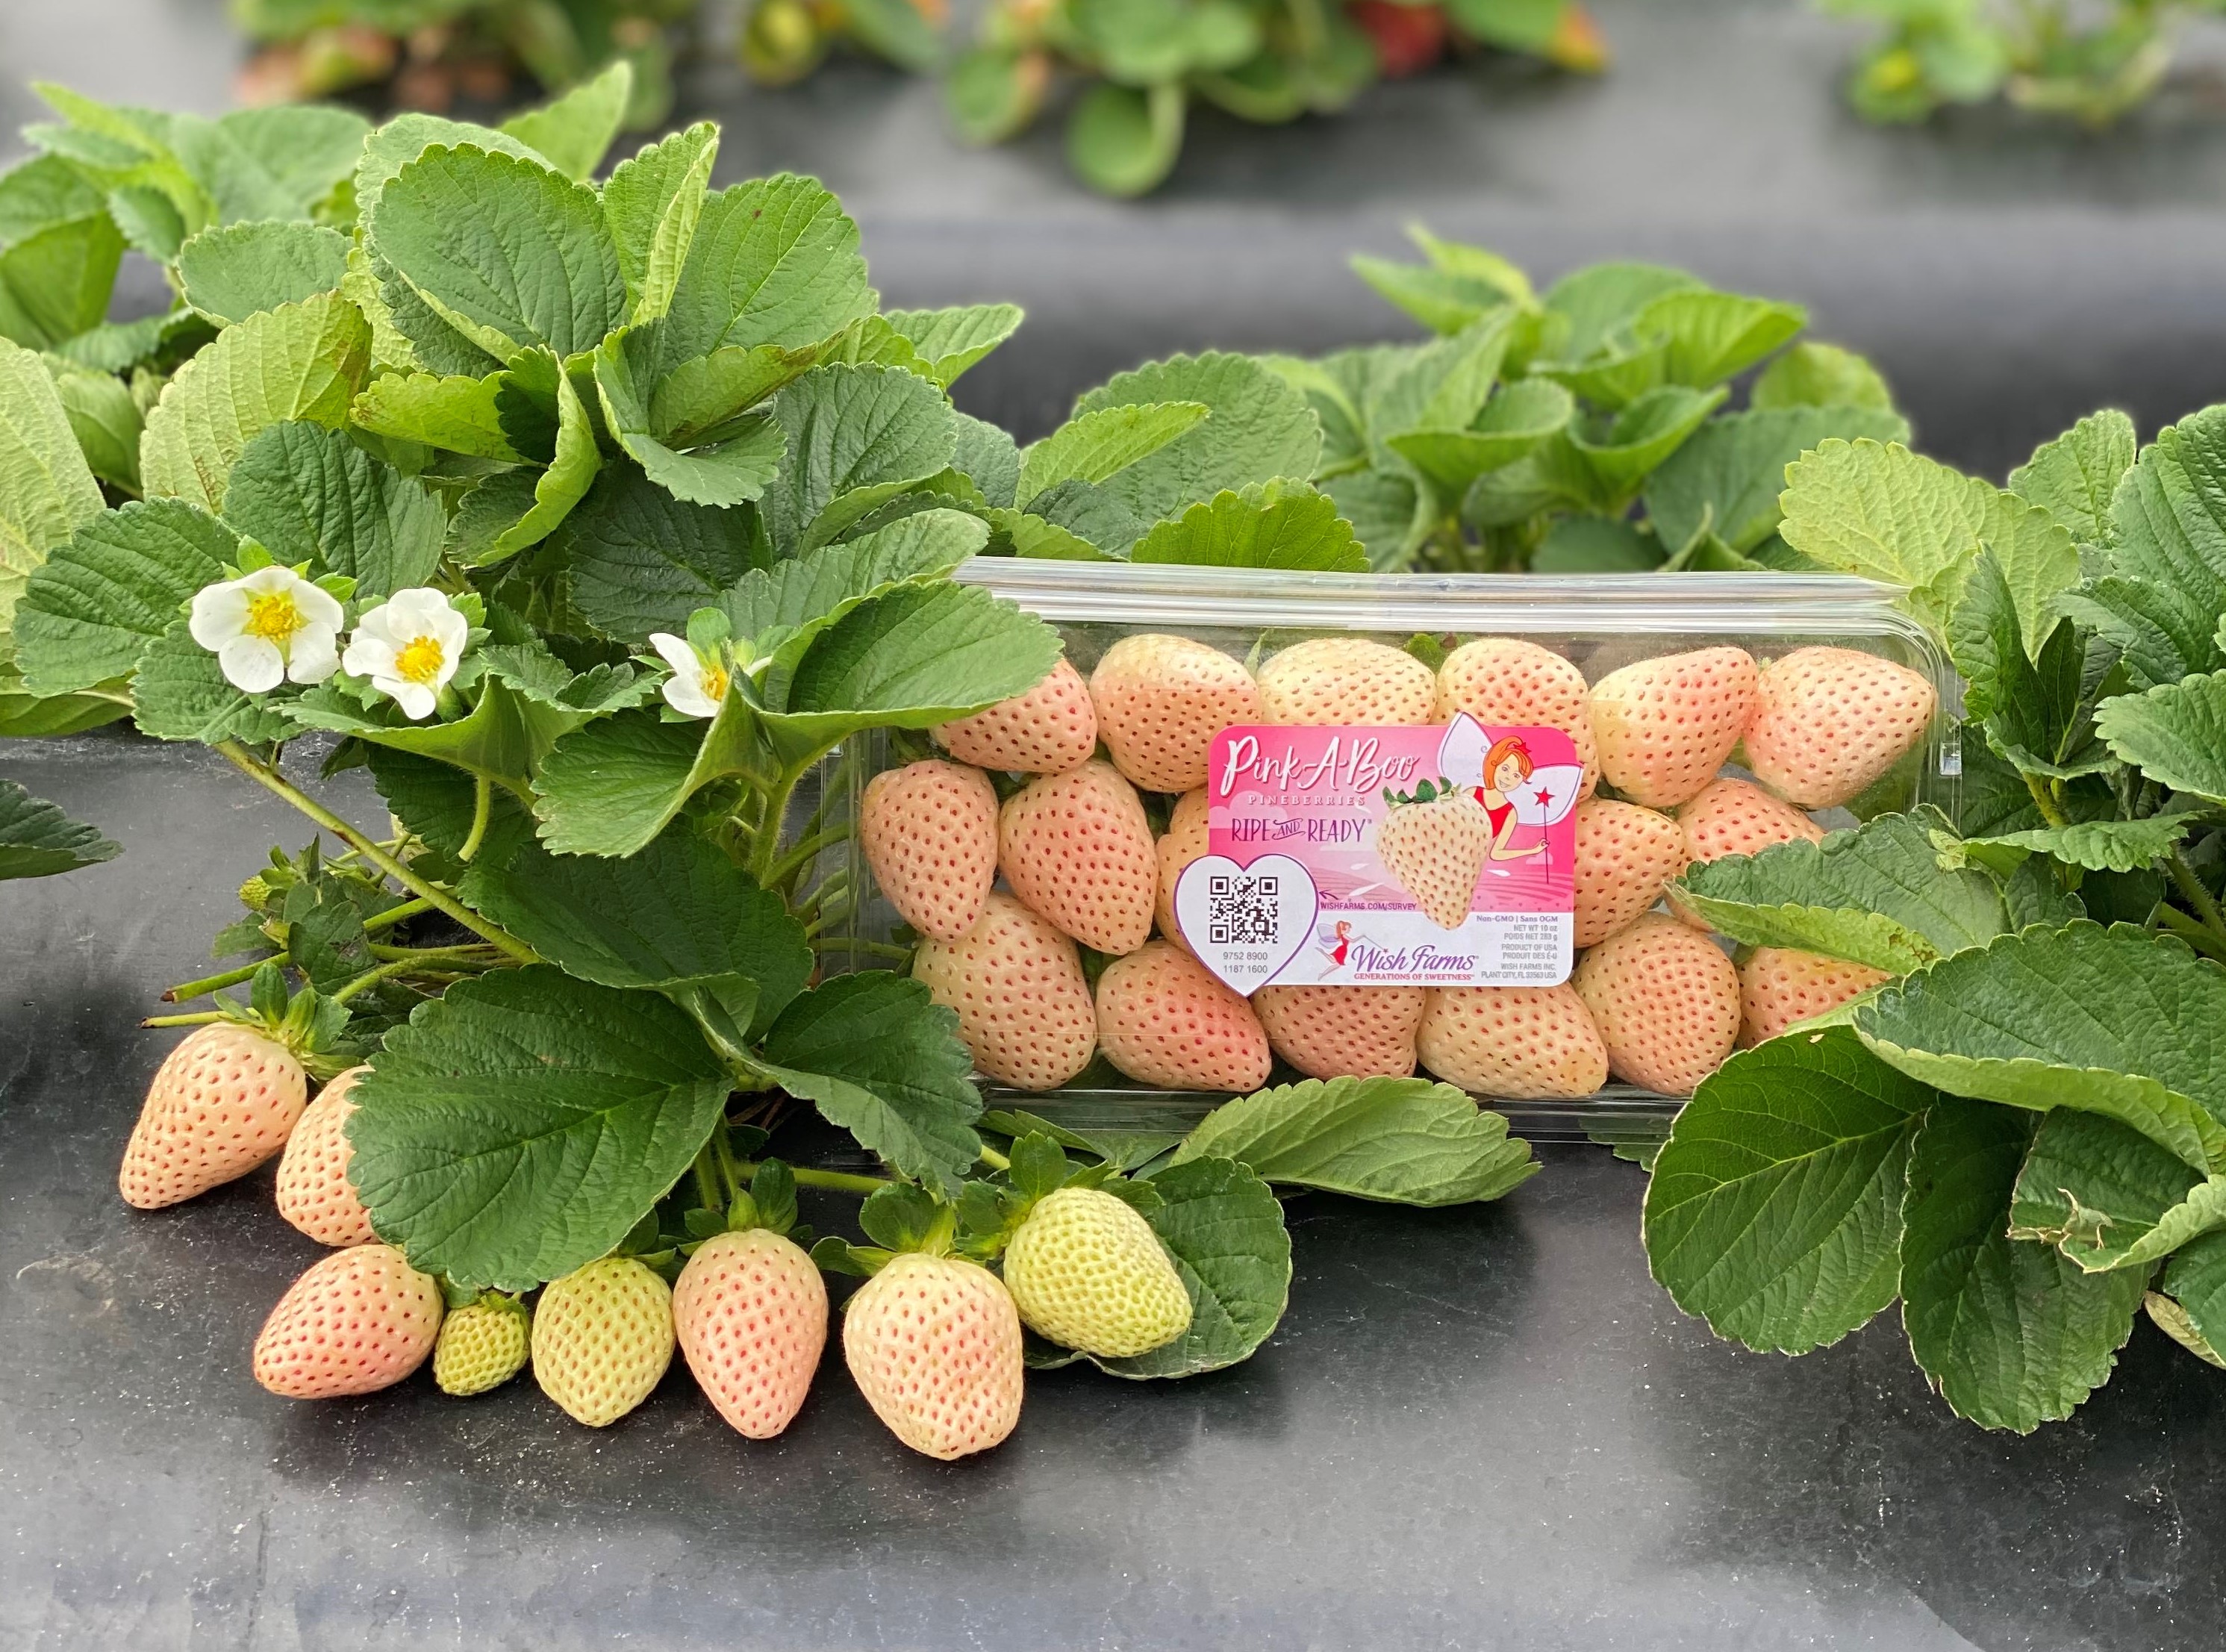 Wish Farms Pink-a-Boo Pineberries